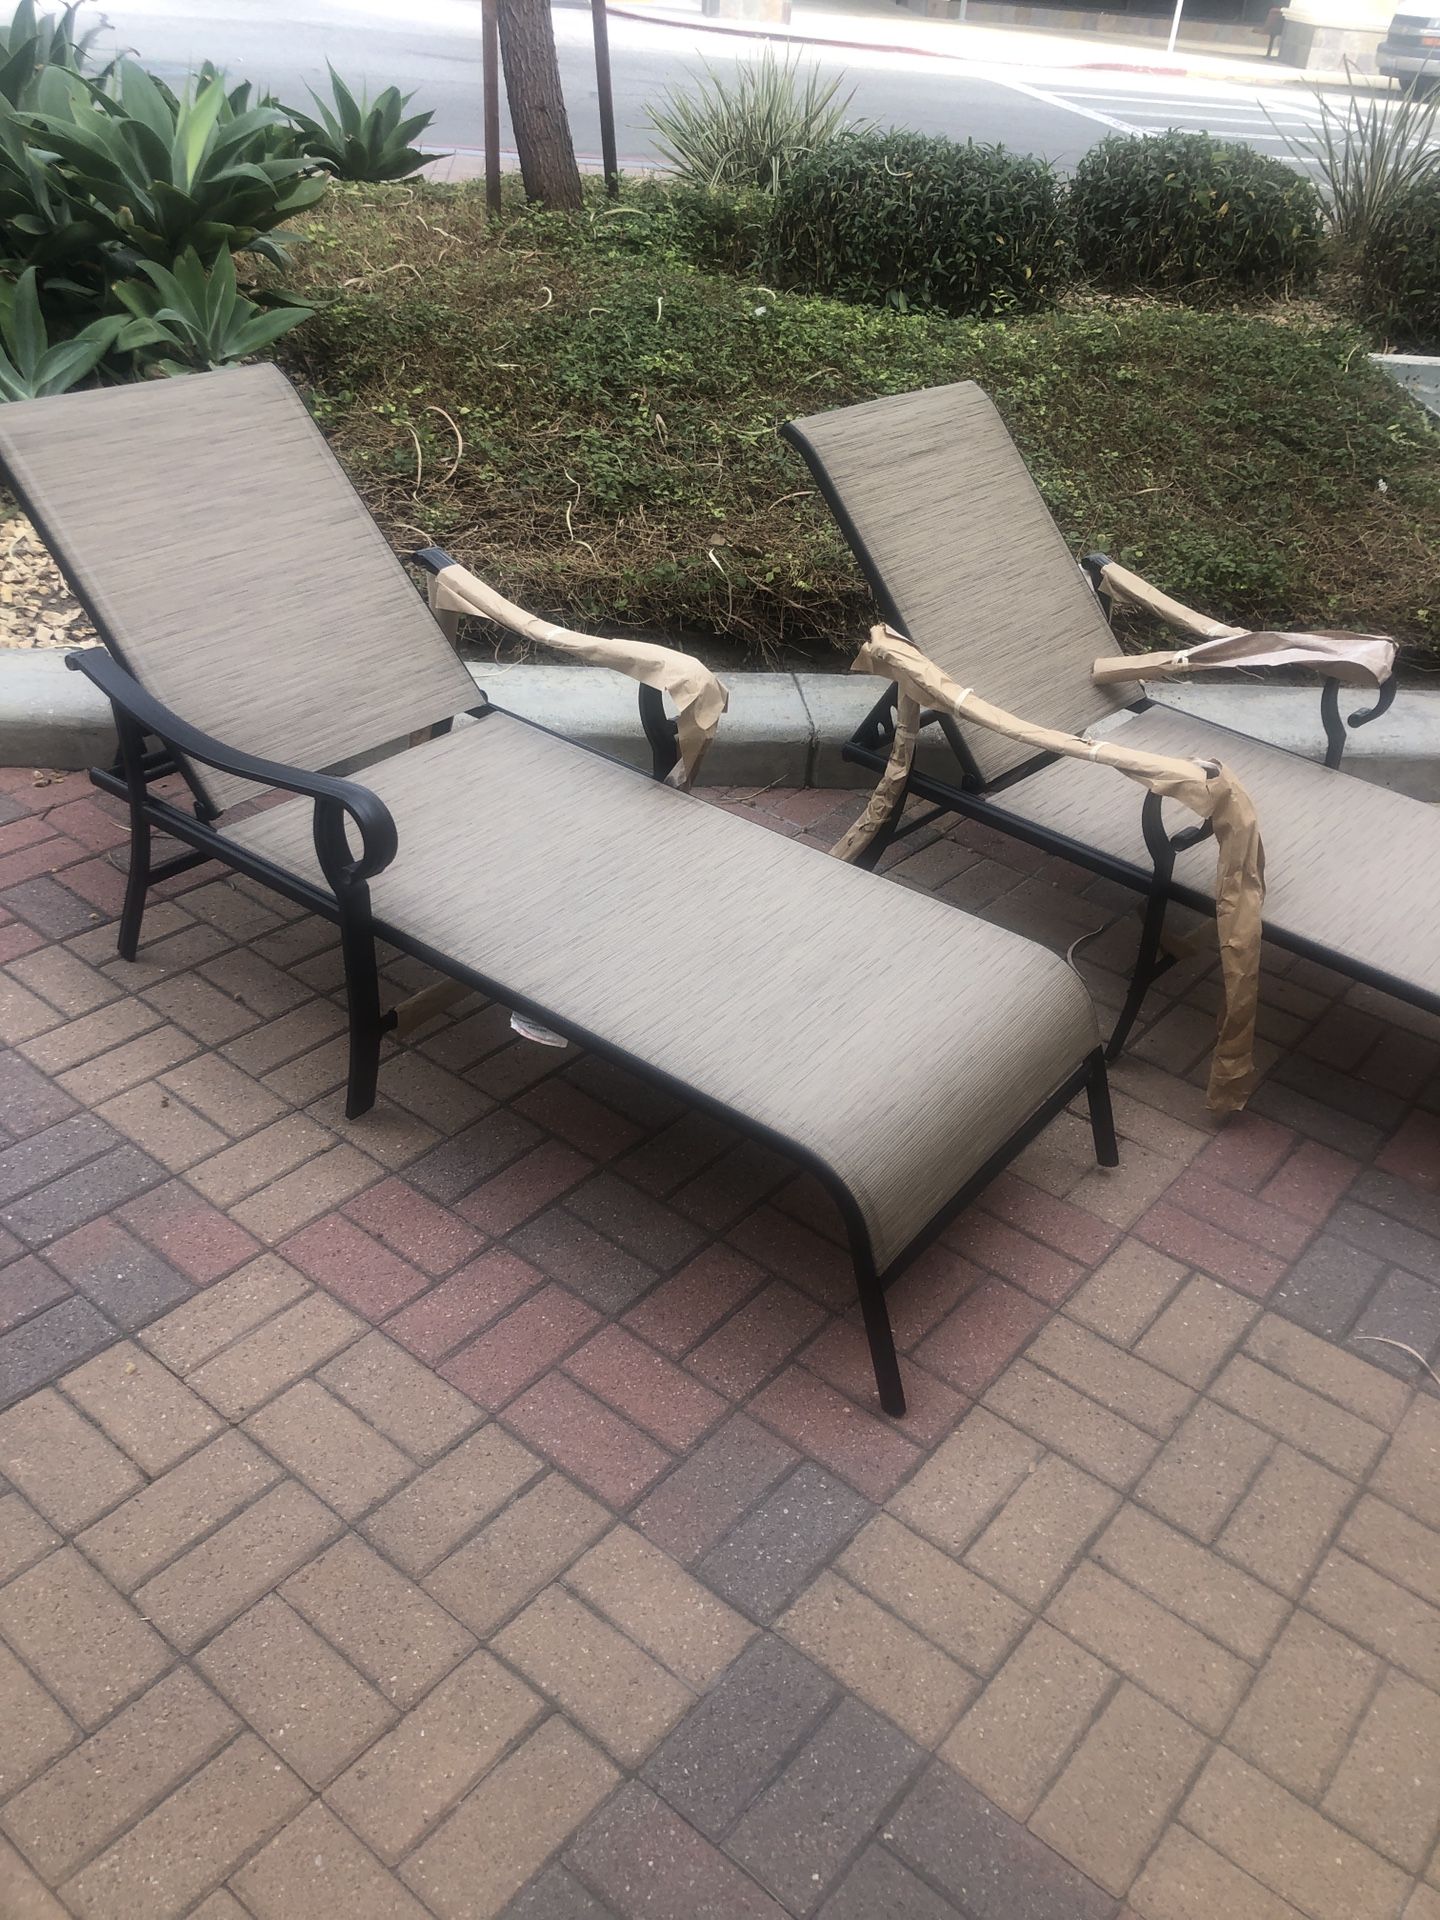 TWO DELUXE OUTDOOR PATIO POOL LOUNGE CHAIRS